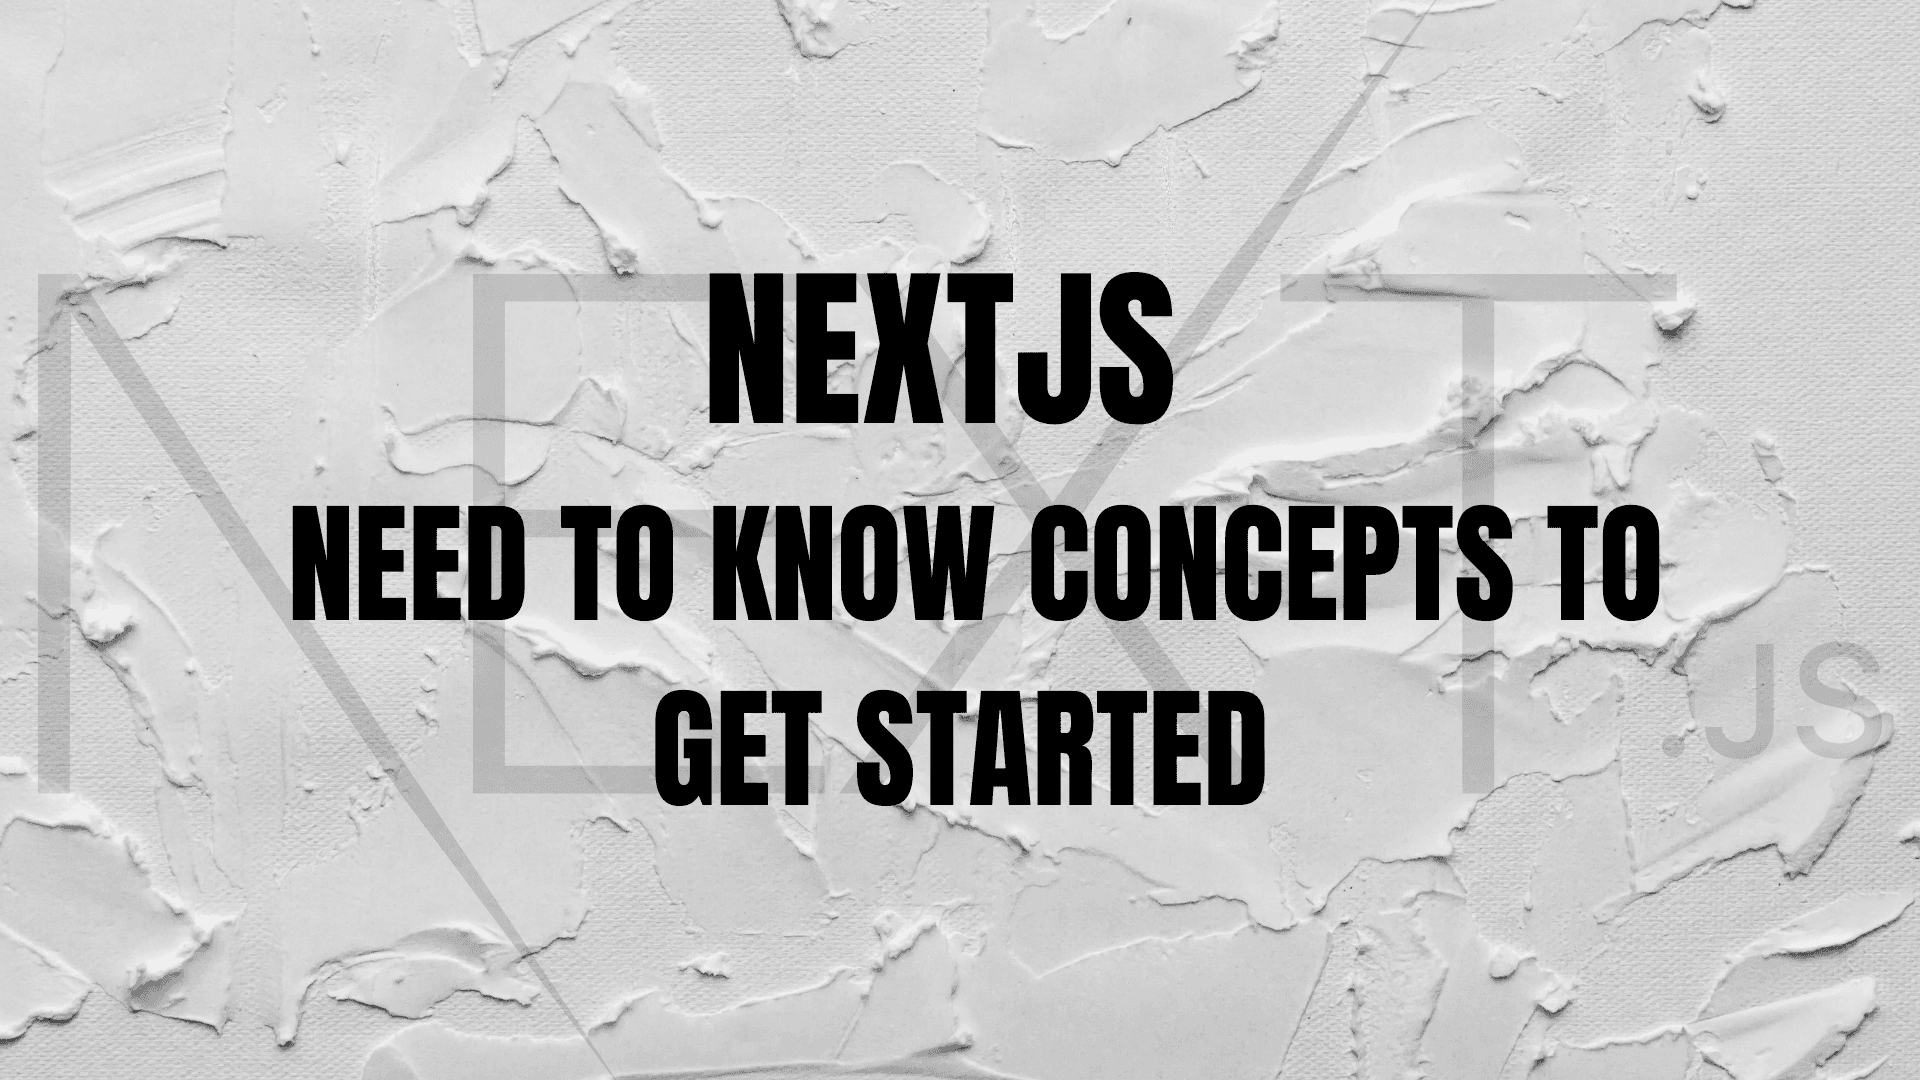 NextJS - Need to know concepts to get started